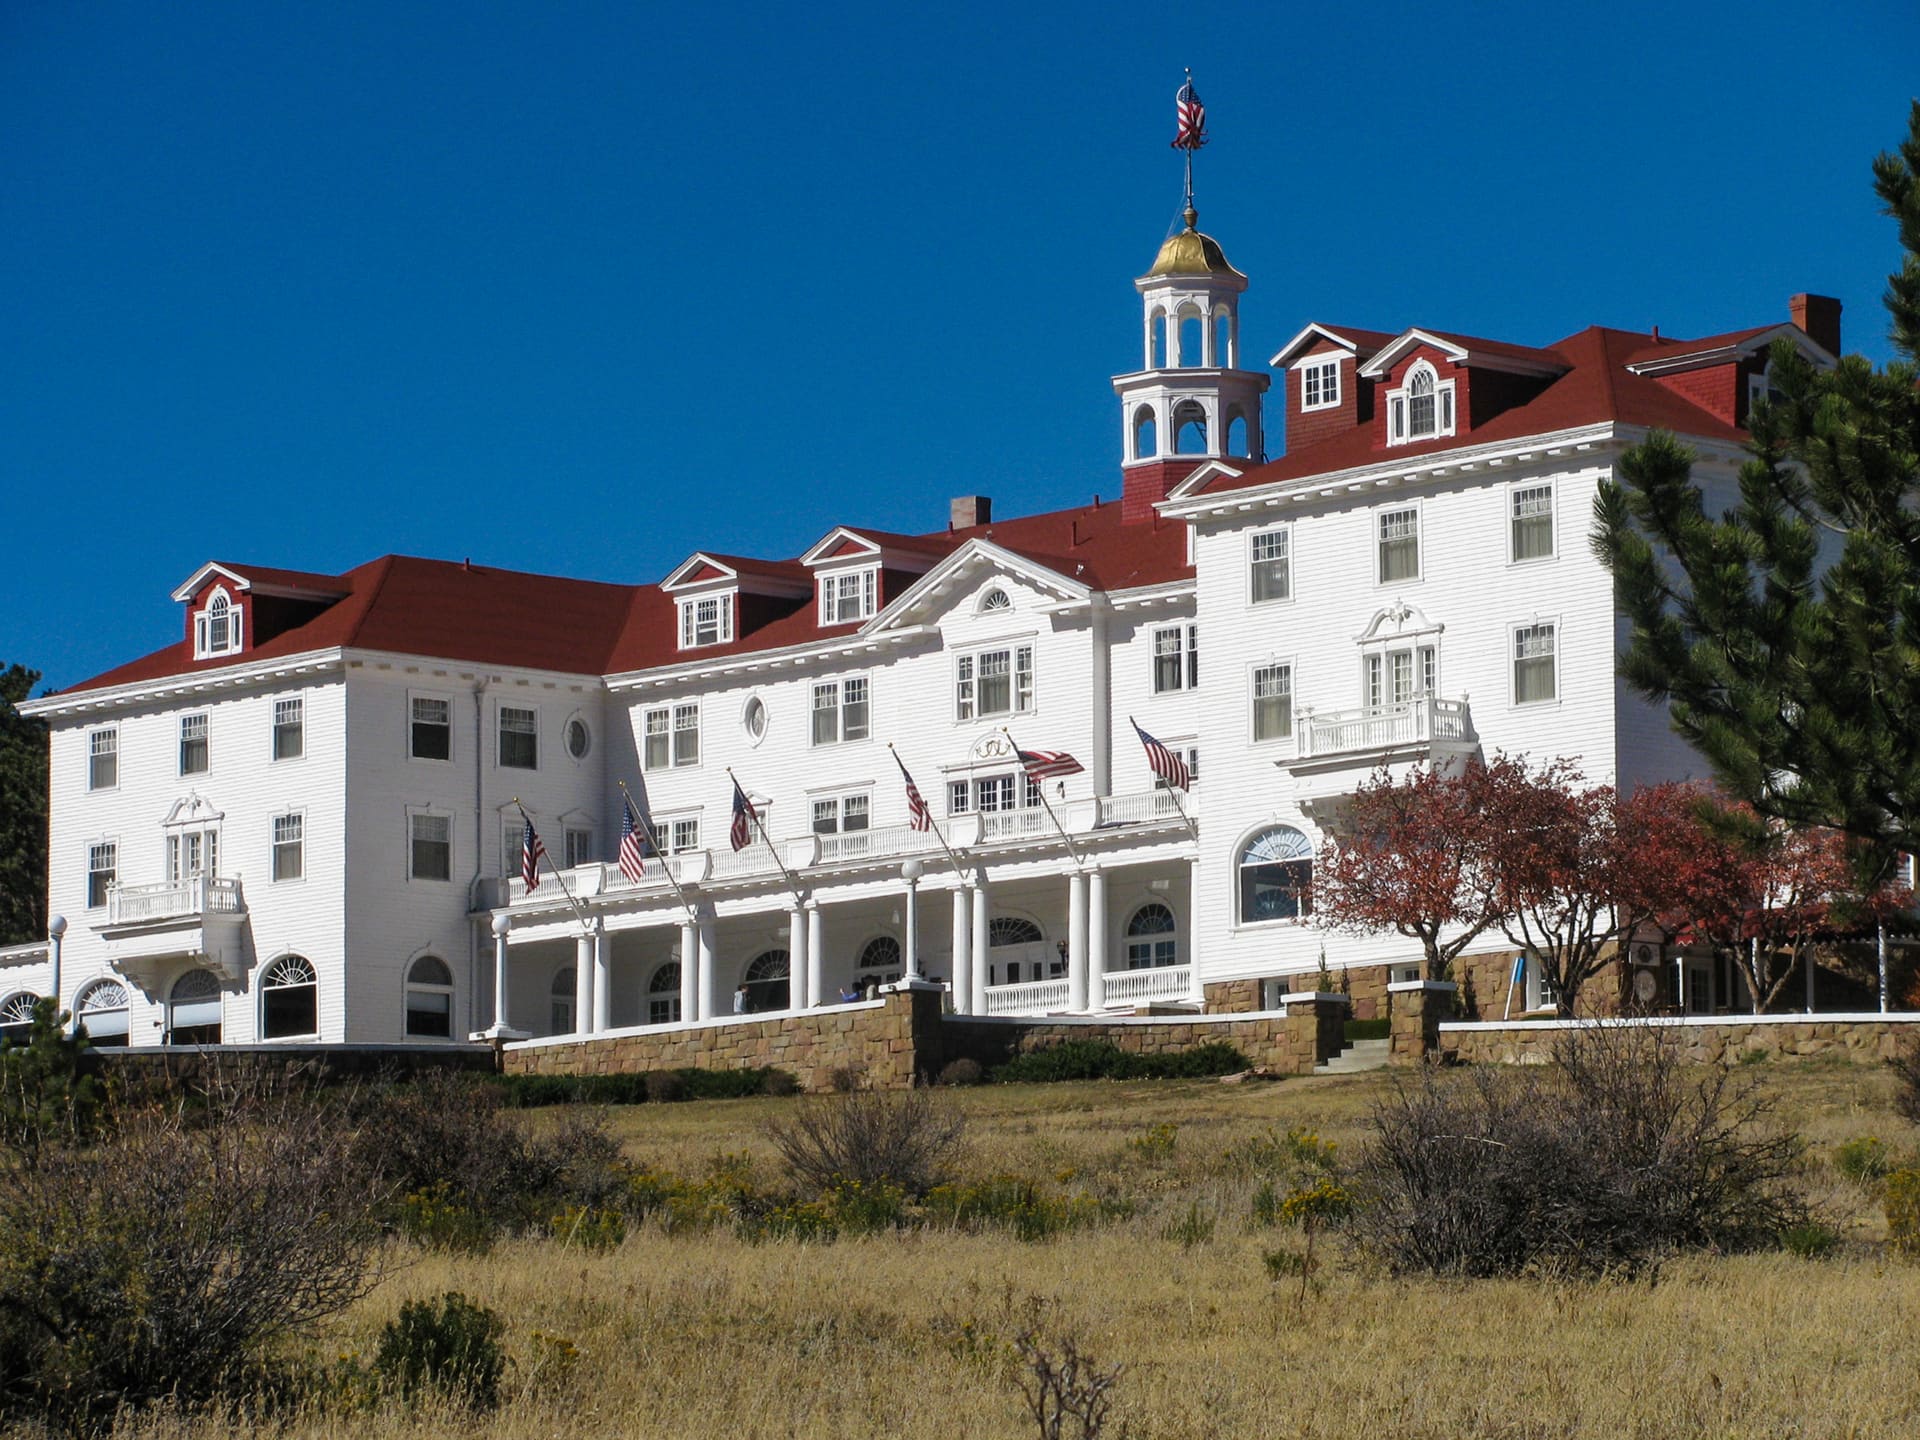 More haunted hotels across the U.S.